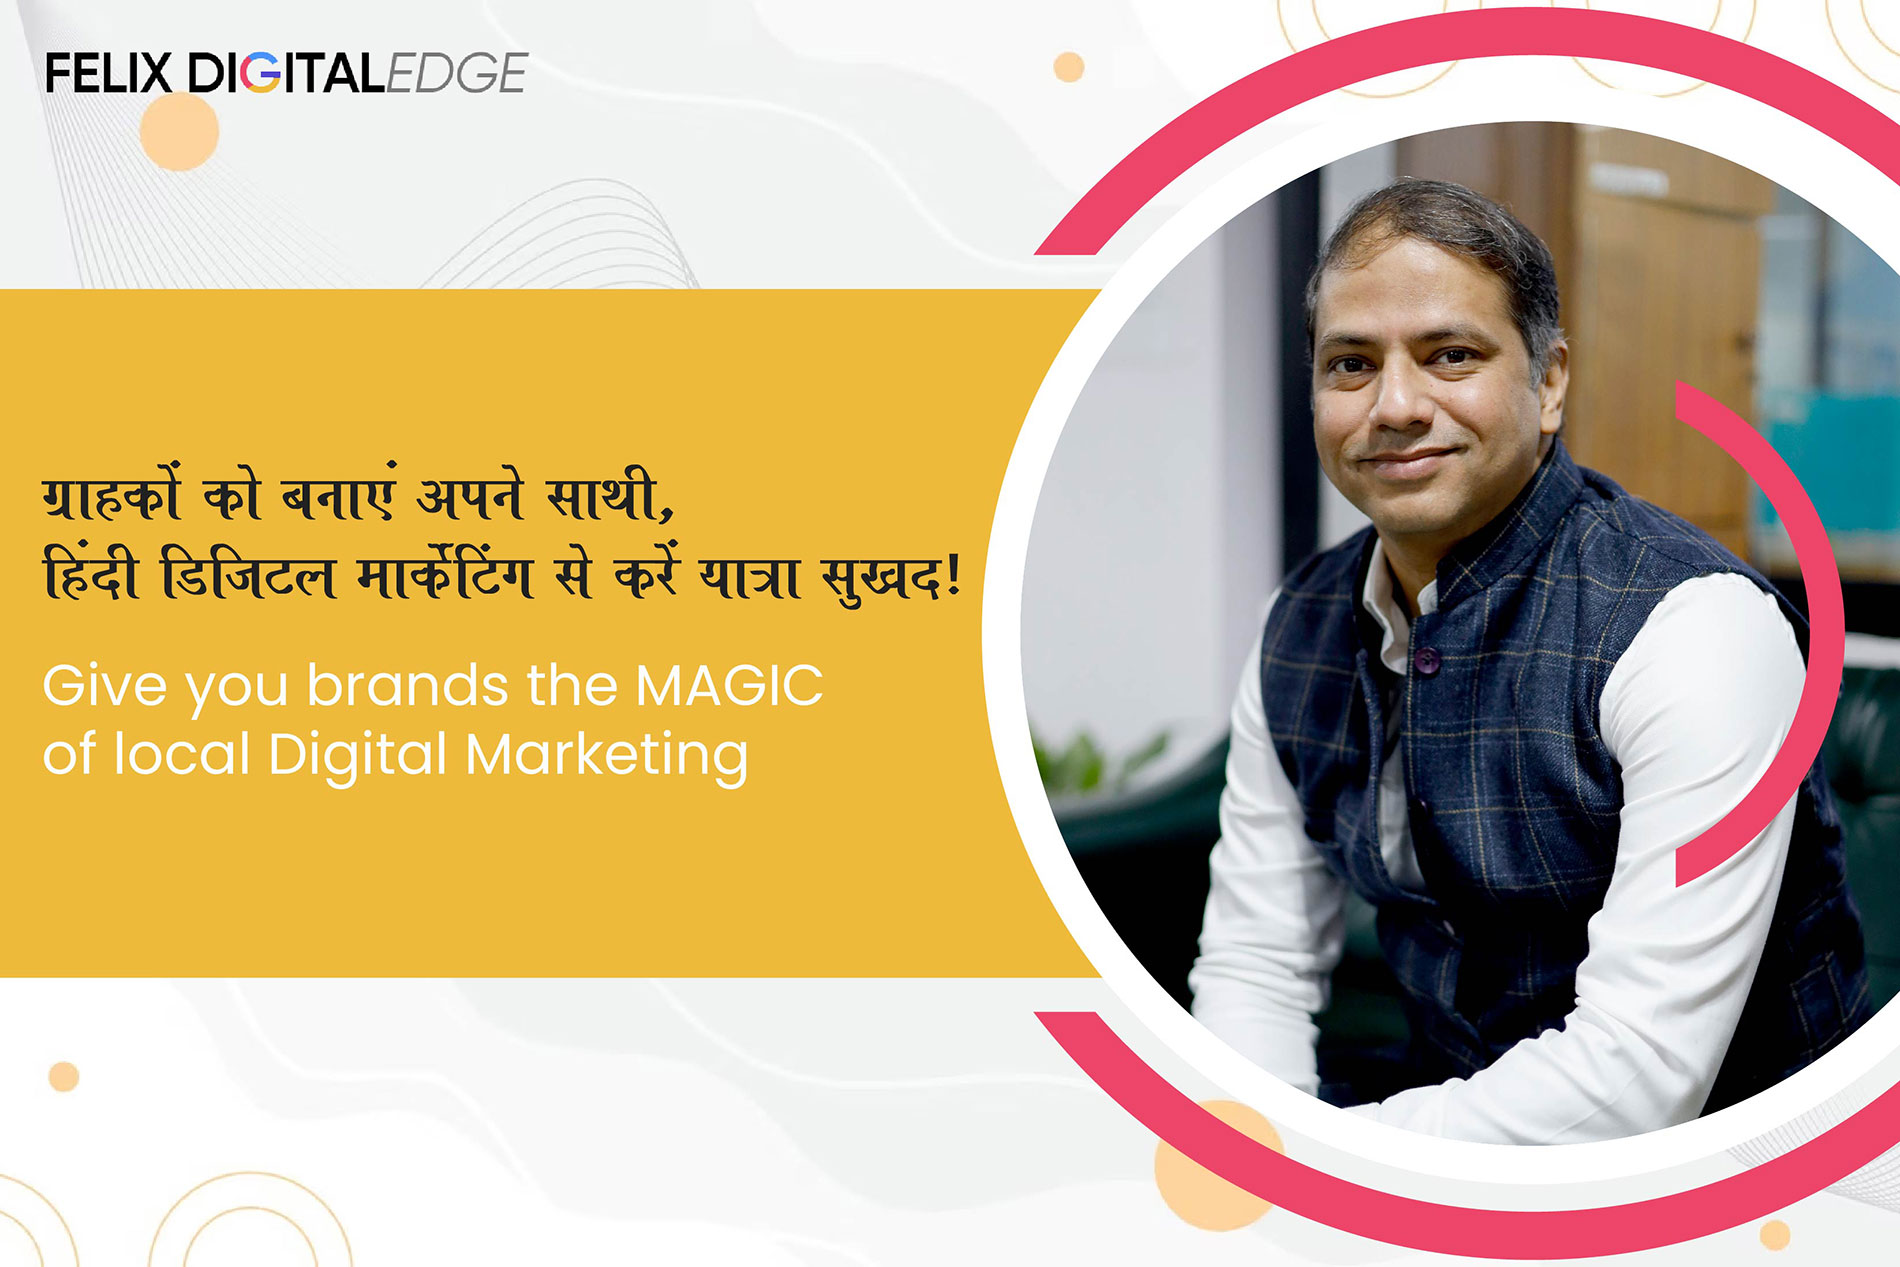 Digital Marketing in Hindi language: Crafting Success Through Local Connections and Cultural Affinity